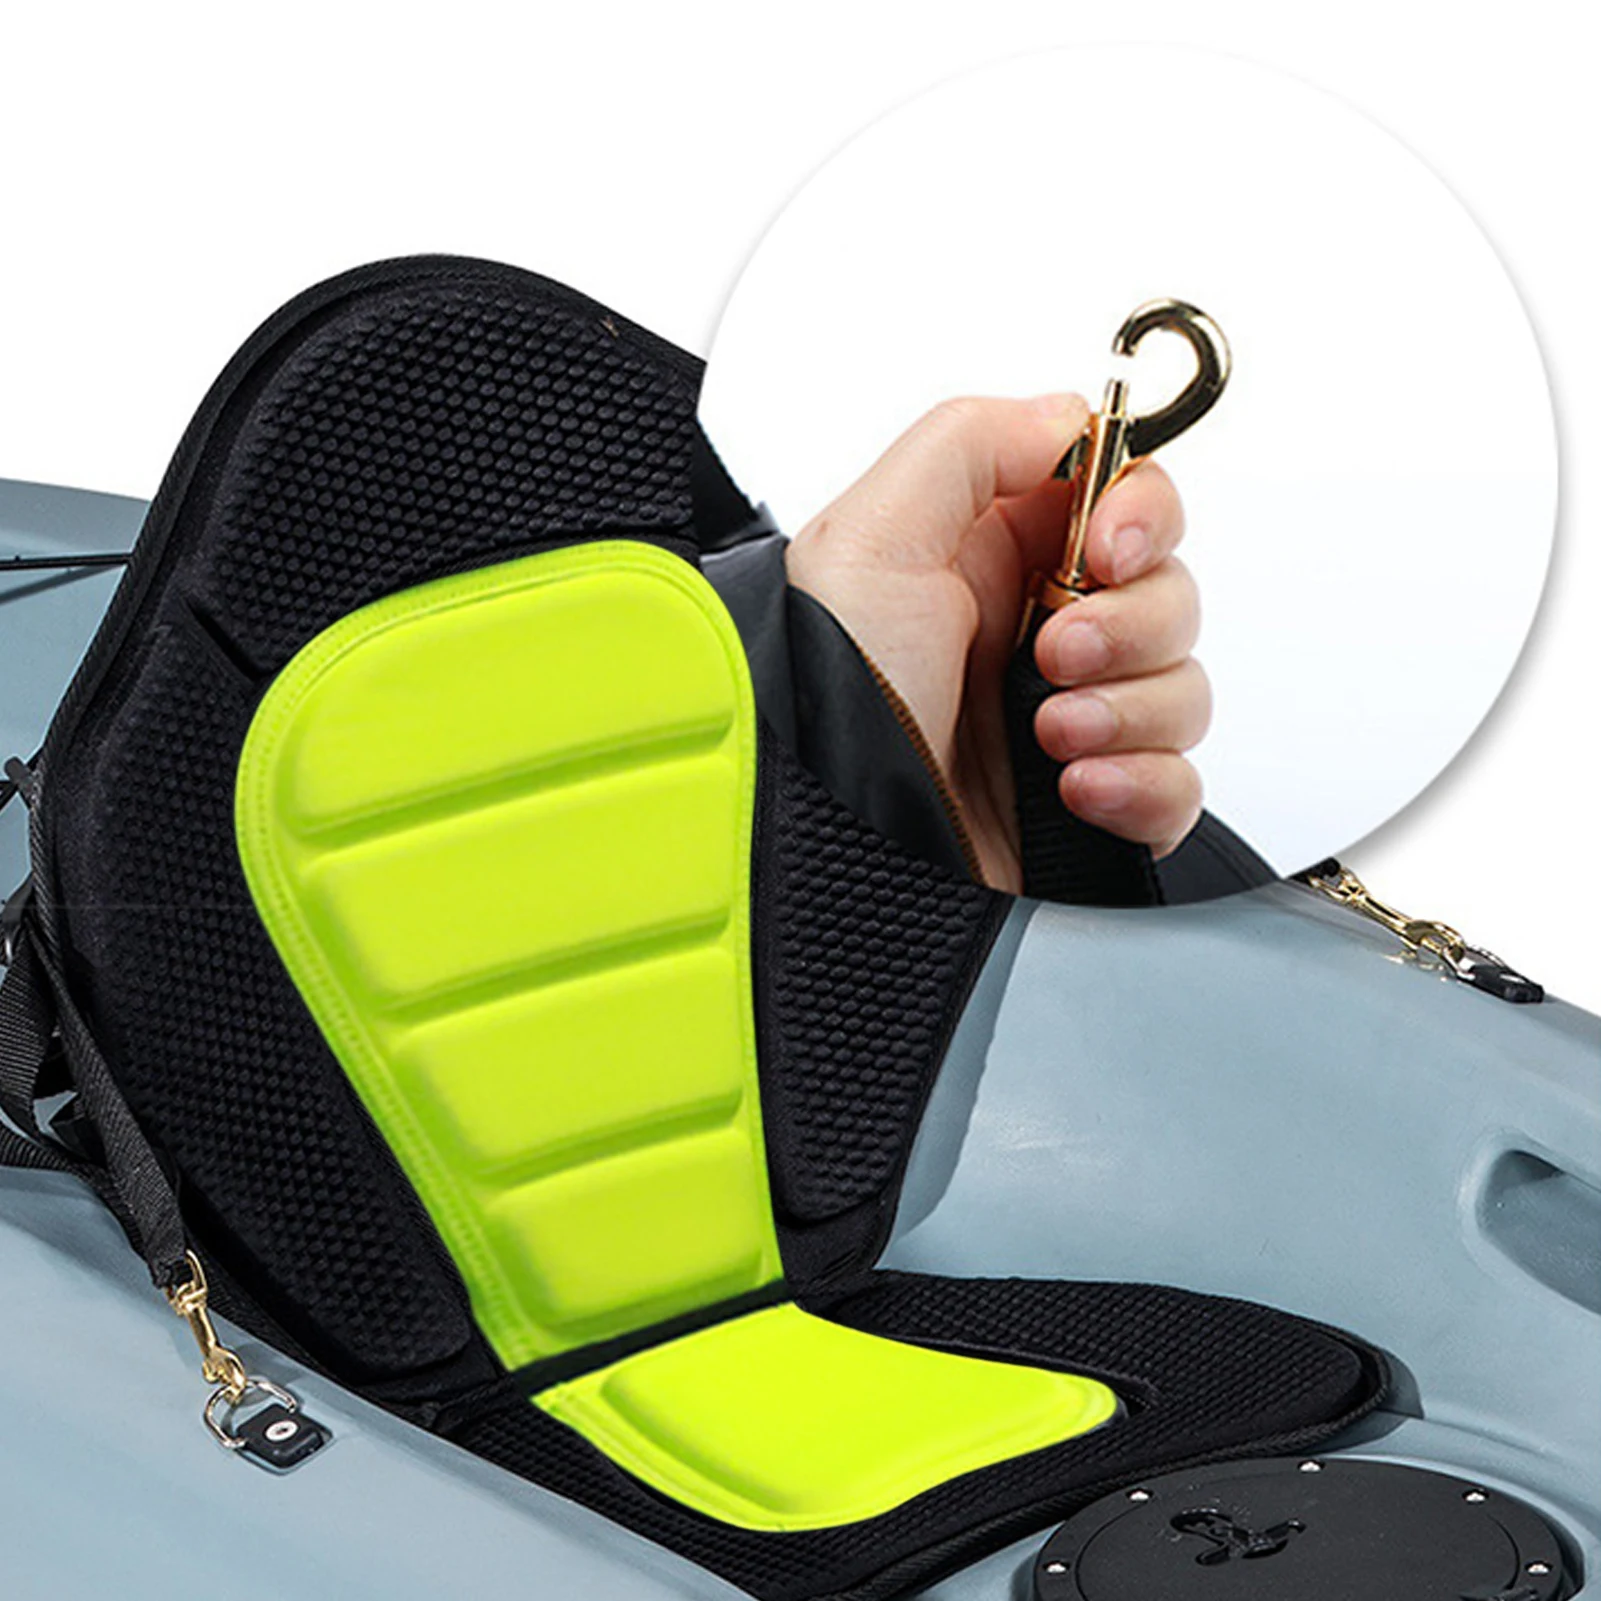 Kayak Seat Canoe Seats With Back Support Adjustable High